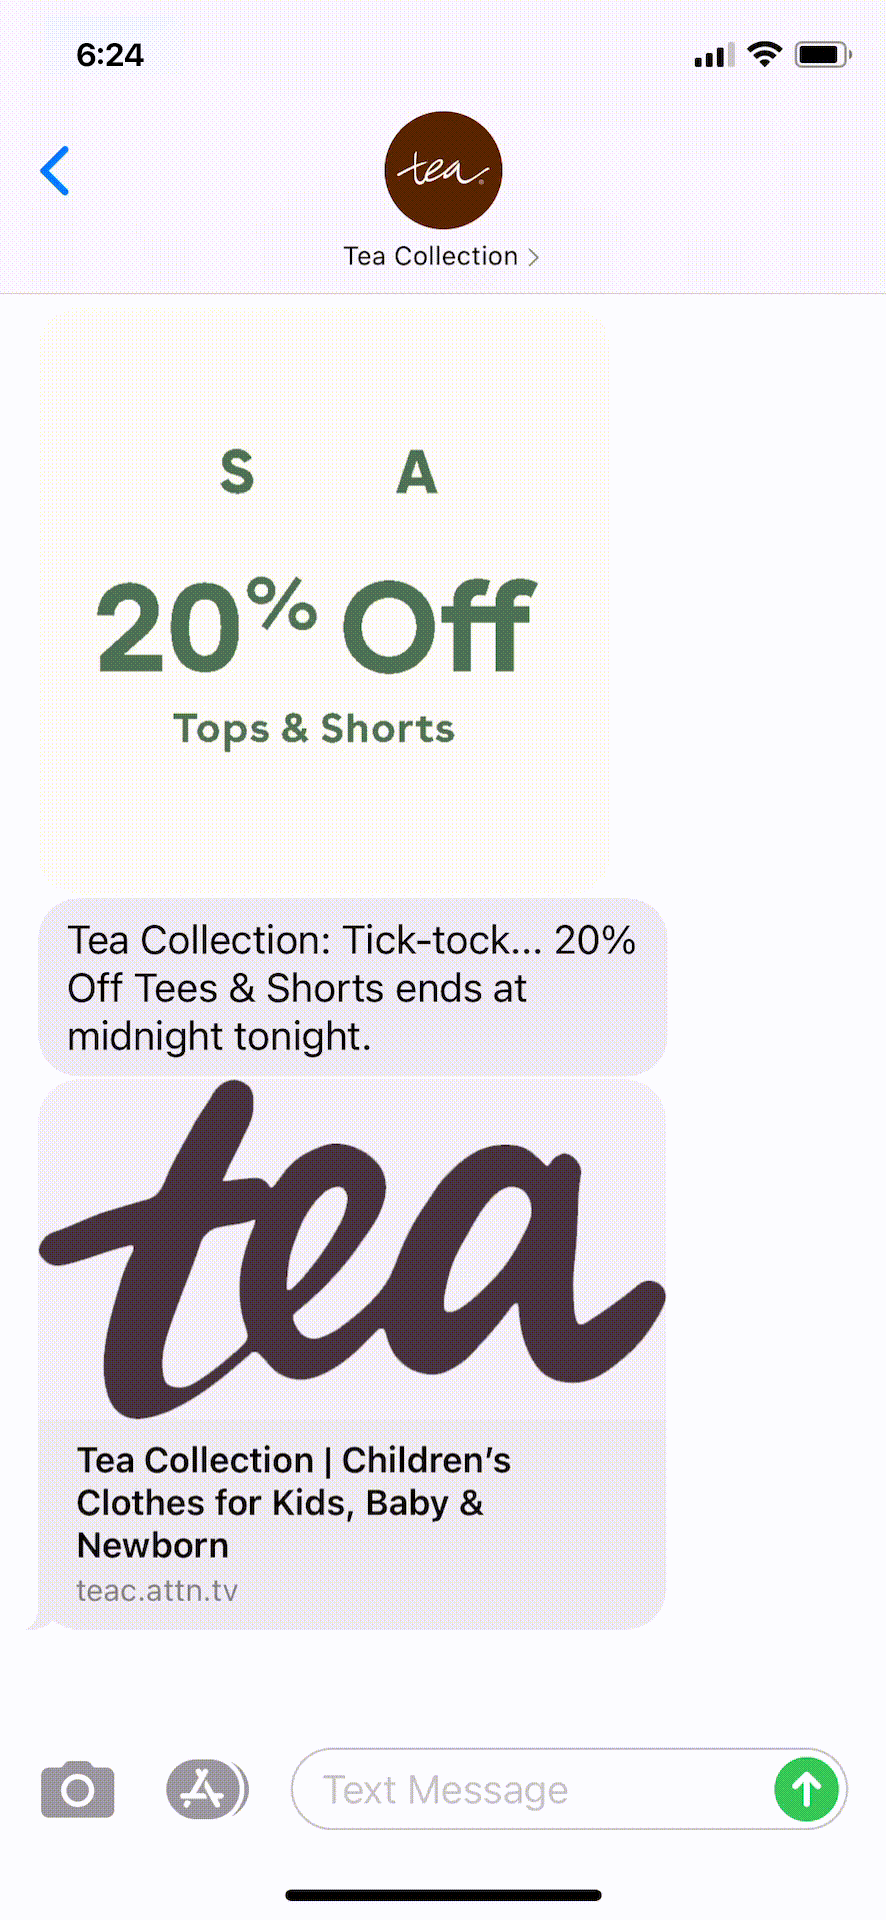 Tea-Collection-Text-Message-Marketing-Example-02.16.2021